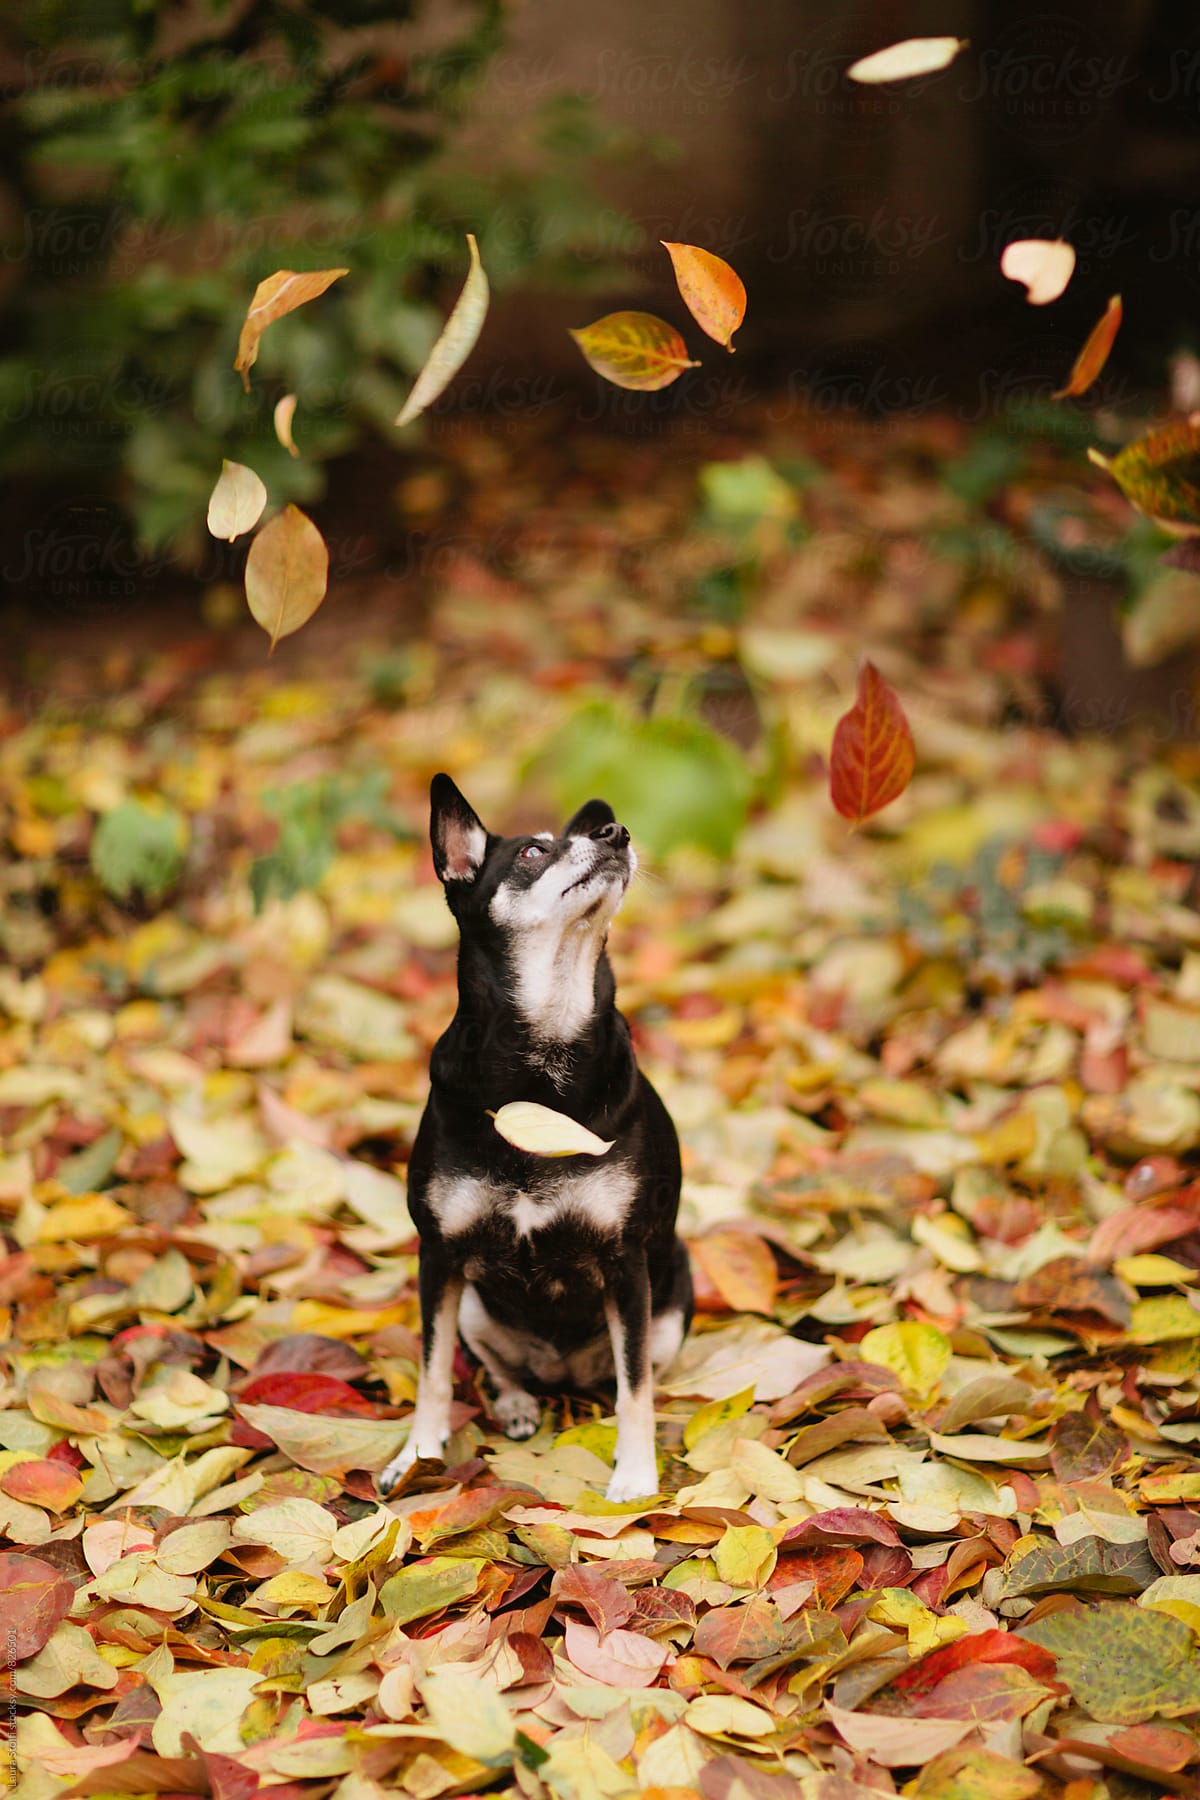 Little dog sits and looks up at fallen leaves flying in the air